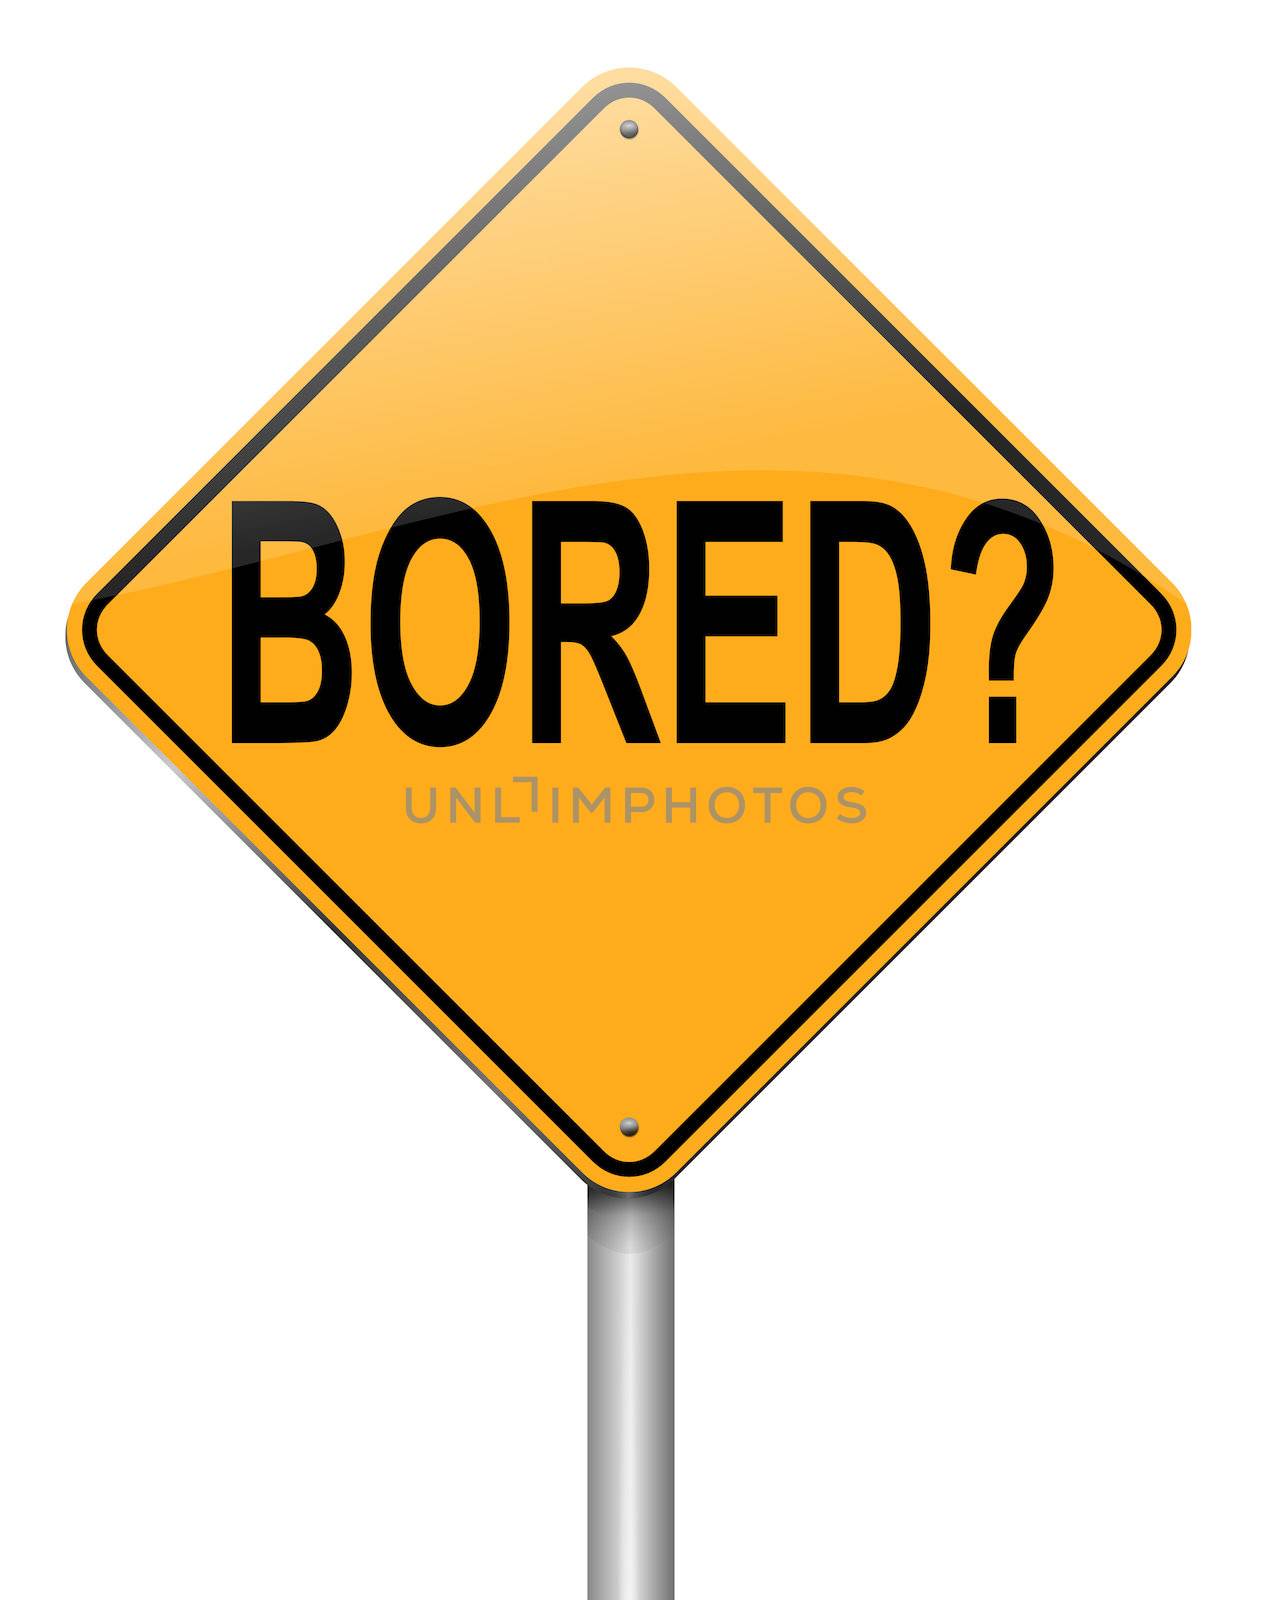 Illustration depicting a roadsign with a bored concept. White background.